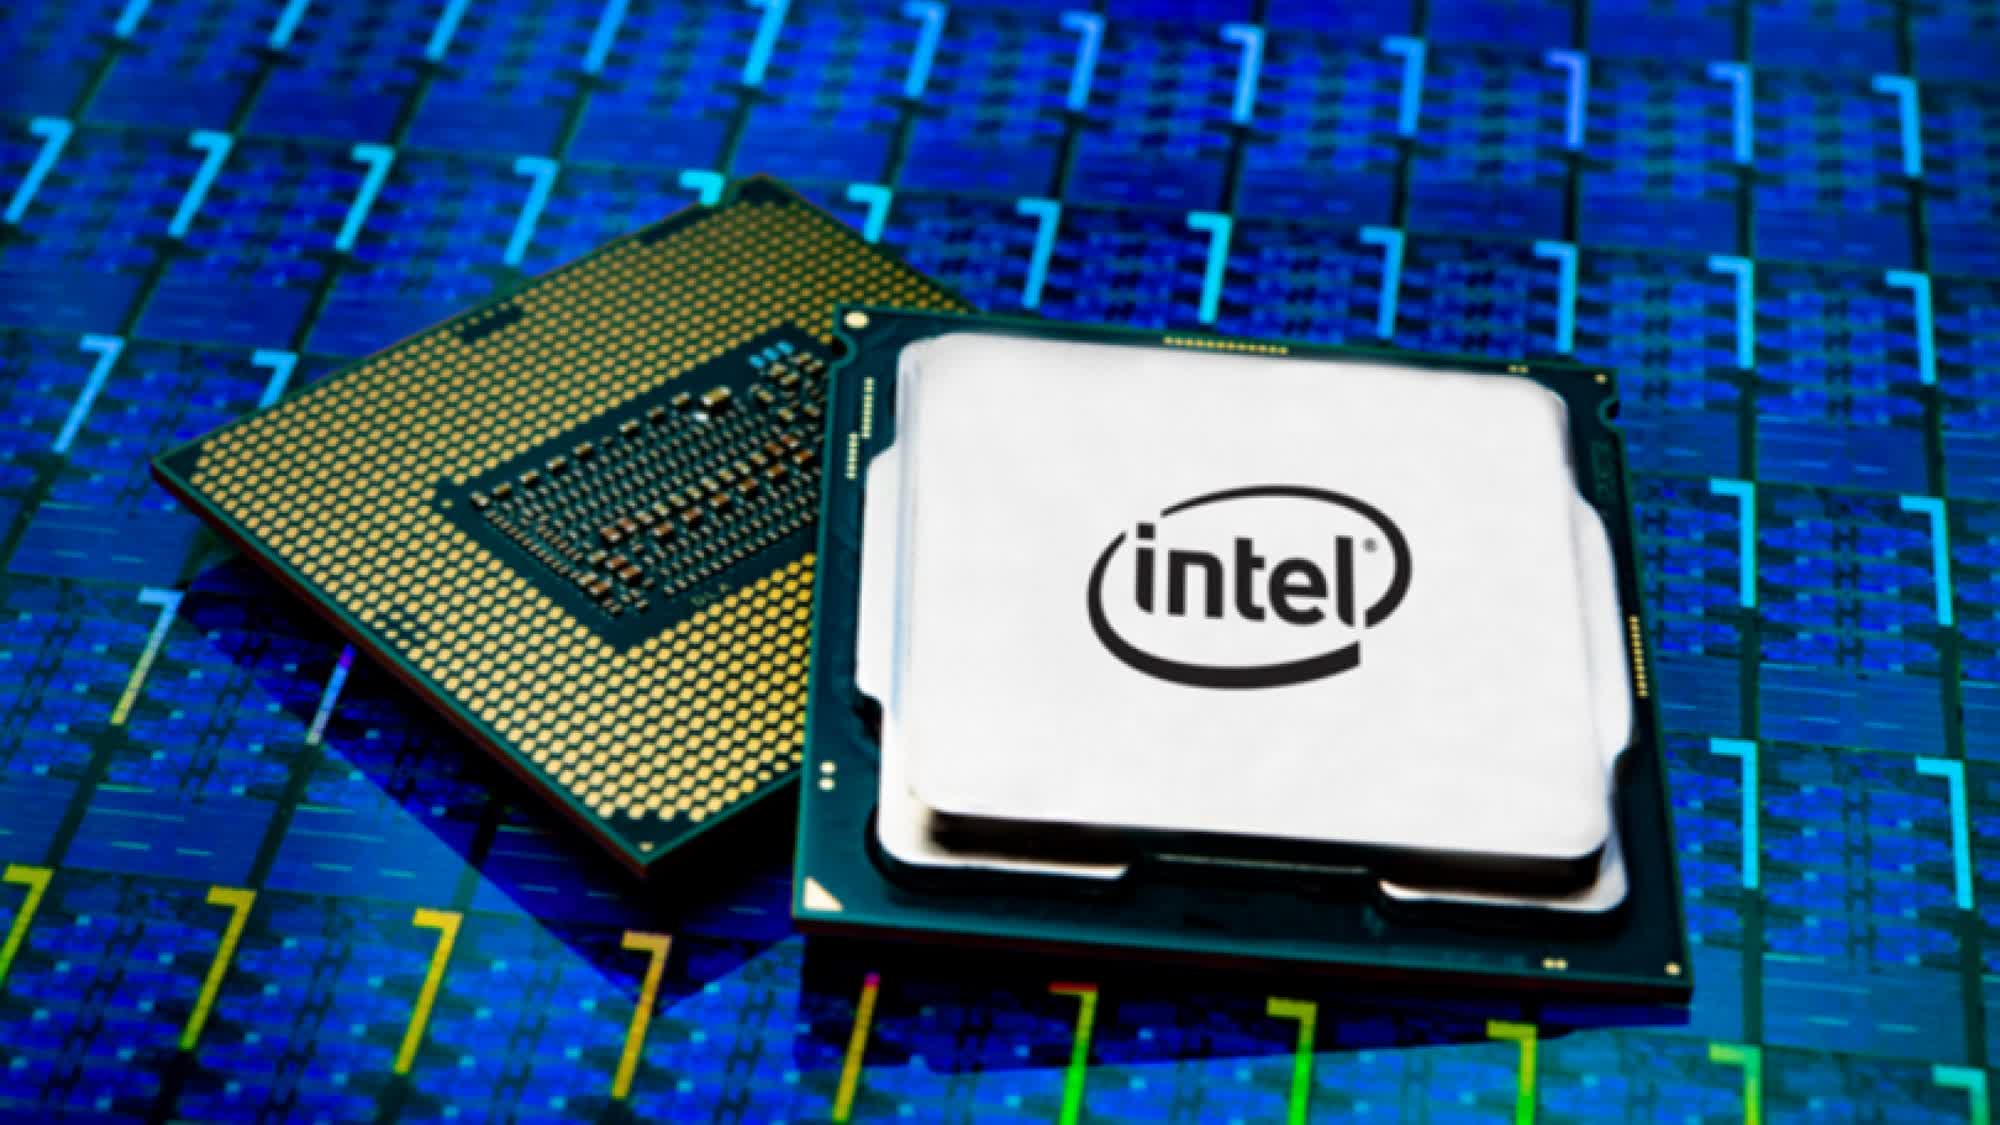 Intel ties up with Arm to build chips for fabless semiconductor companies